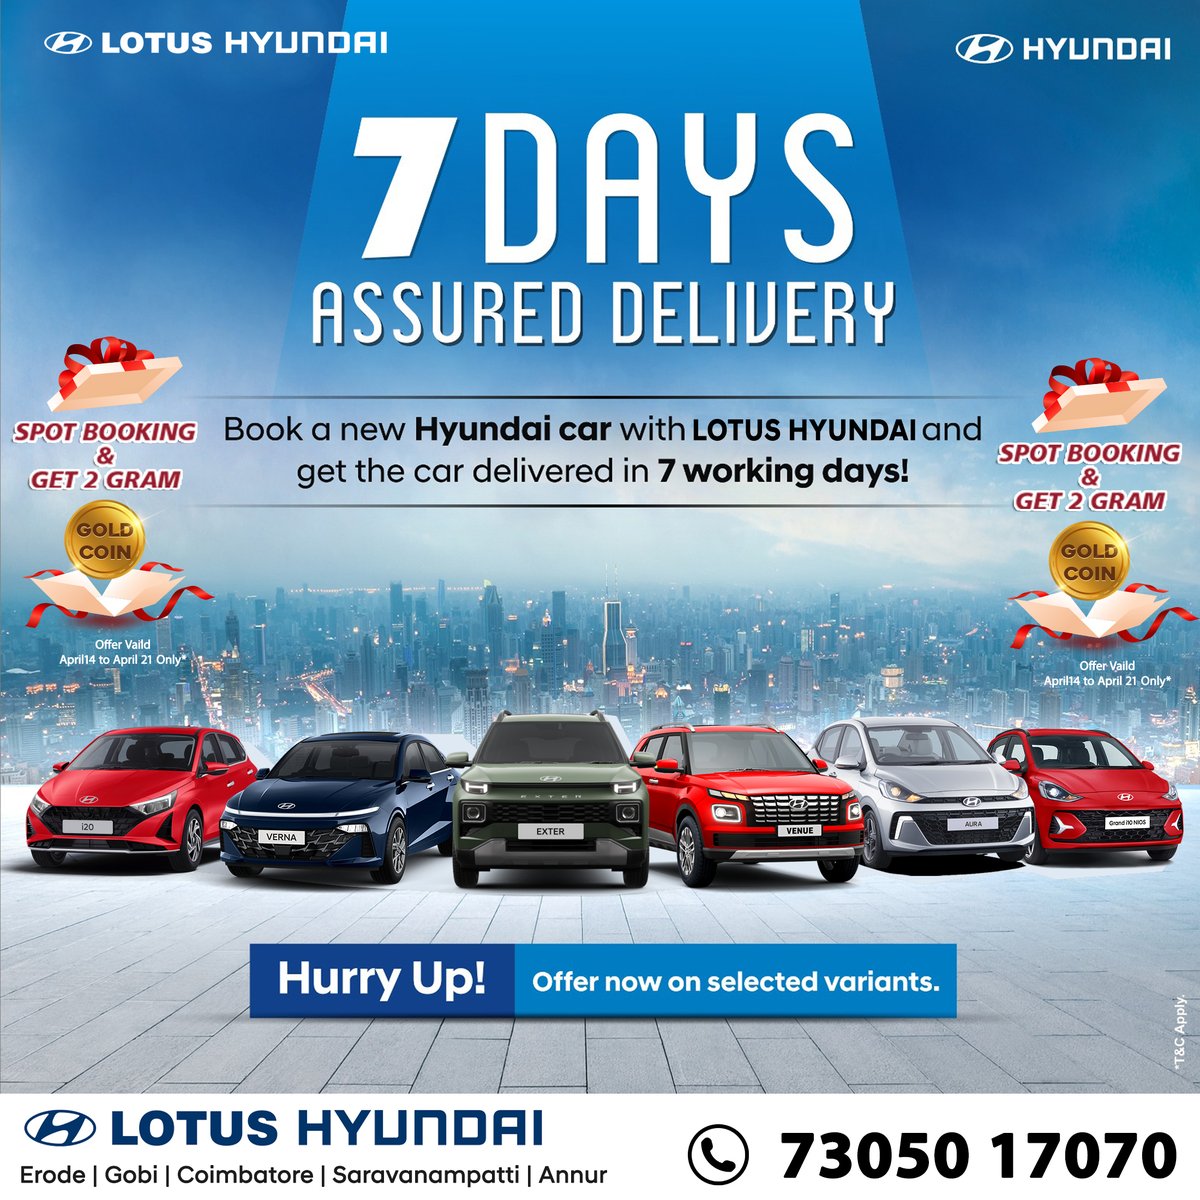 SUPER SUMMER SALE!
7 DAYS ASSURED DELIVERY*
SPECIAL OFFER FOR SPOT BOOKING!

FOR MORE DETAILS 073050 17070
#Lotushyundaierode #Lotushyundai #summersale2024 #Hyundai #HyundaiIndia #ILoveHyundai #offers